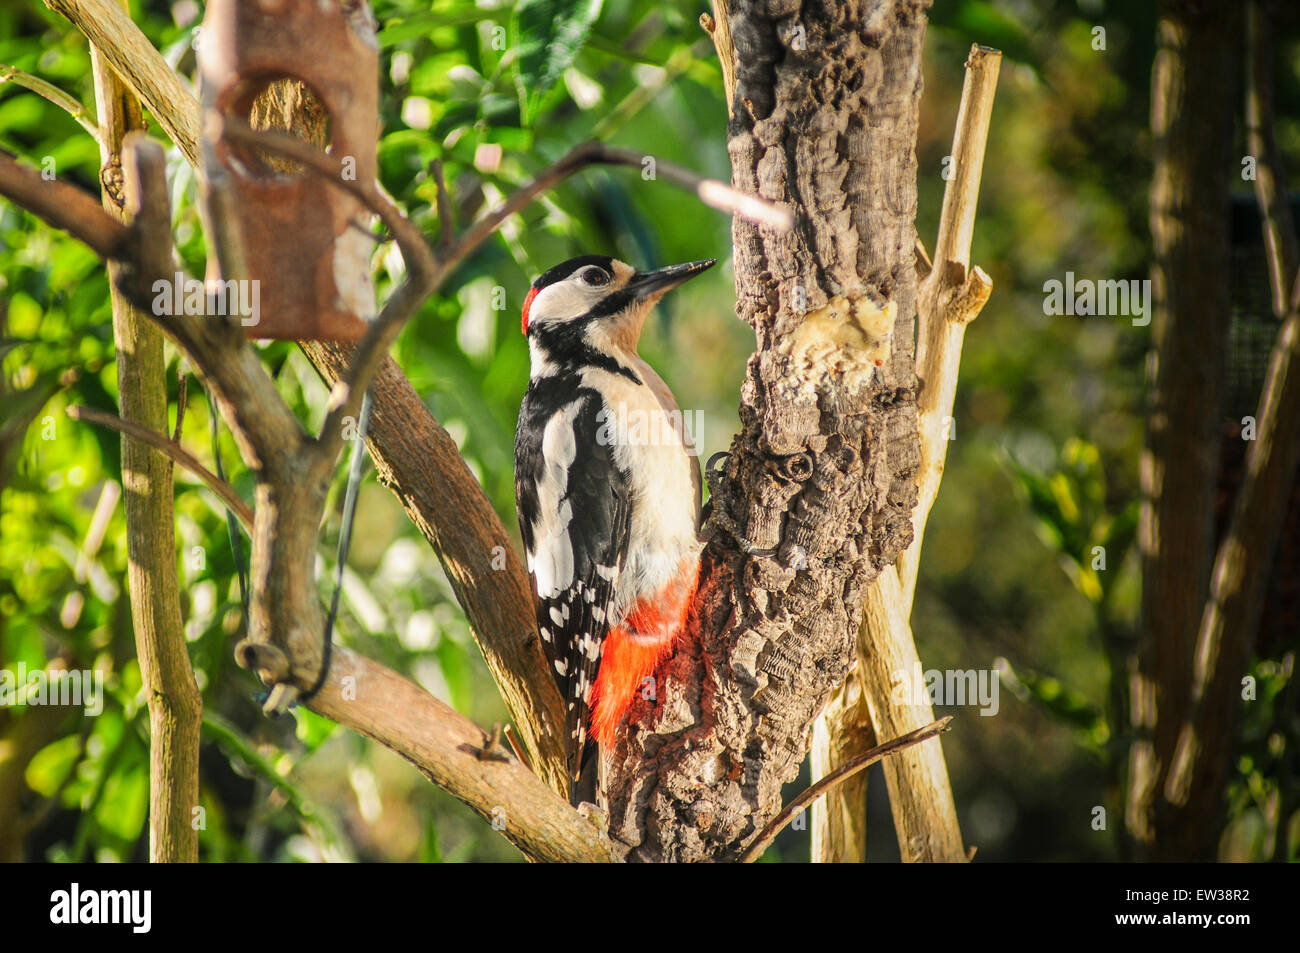 Heathfield, East Sussex, UK.17 June 2015.Early birds. Woodpecker is now a regular visitor to the garden as the sun rises promising to be another warm day Stock Photo